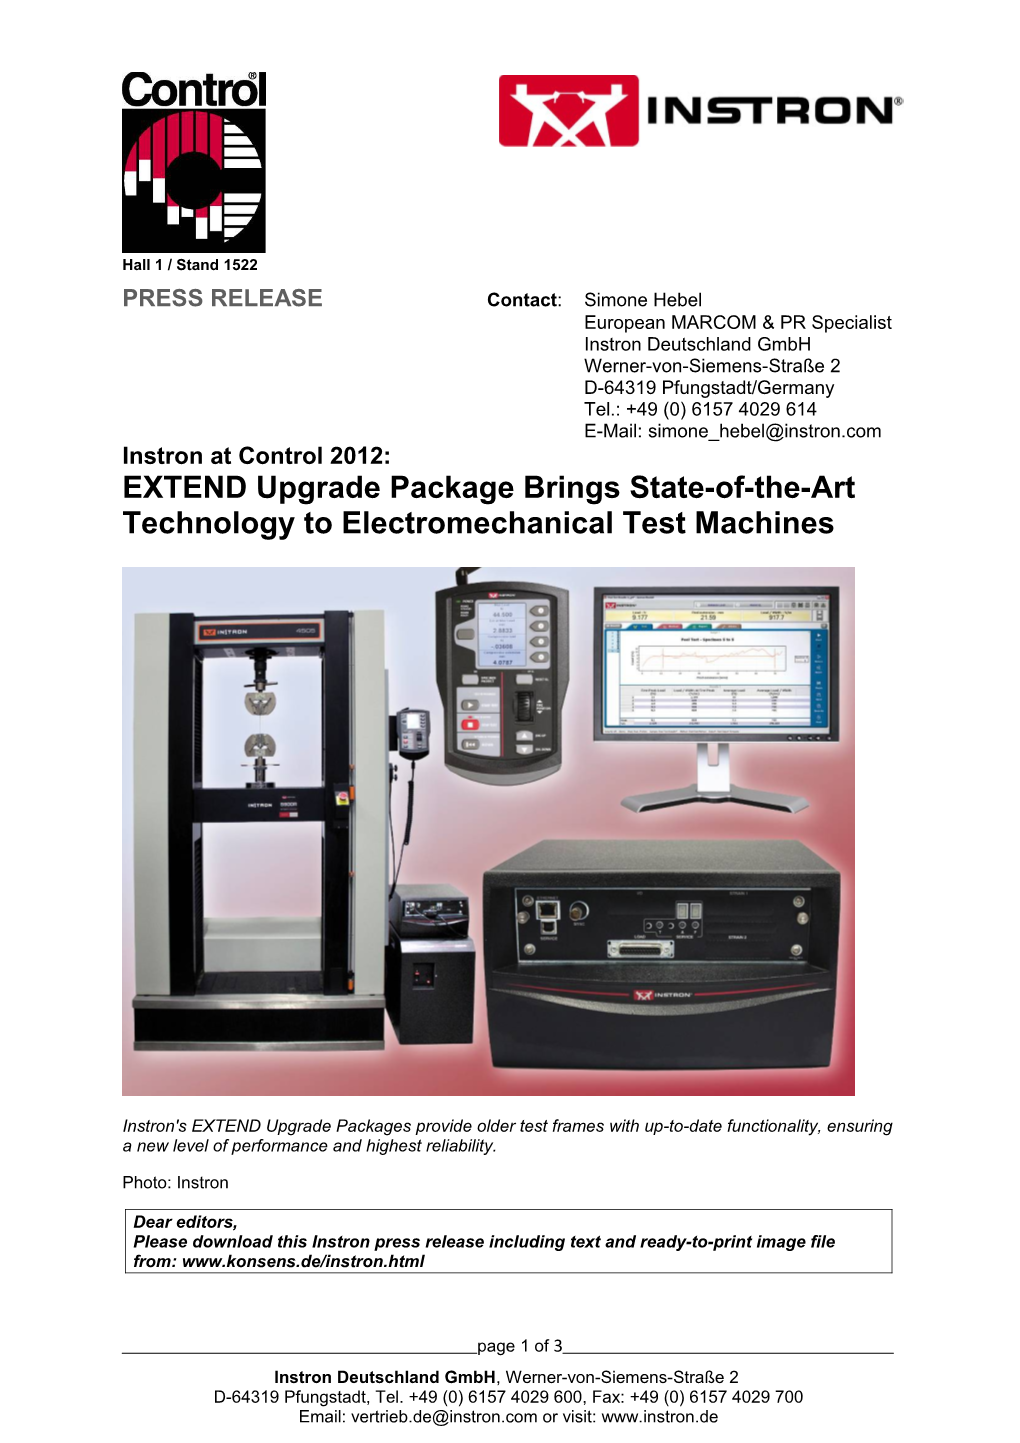 EXTEND Upgrade Package Brings State-Of-The-Art Technology to Electromechanical Test Machines